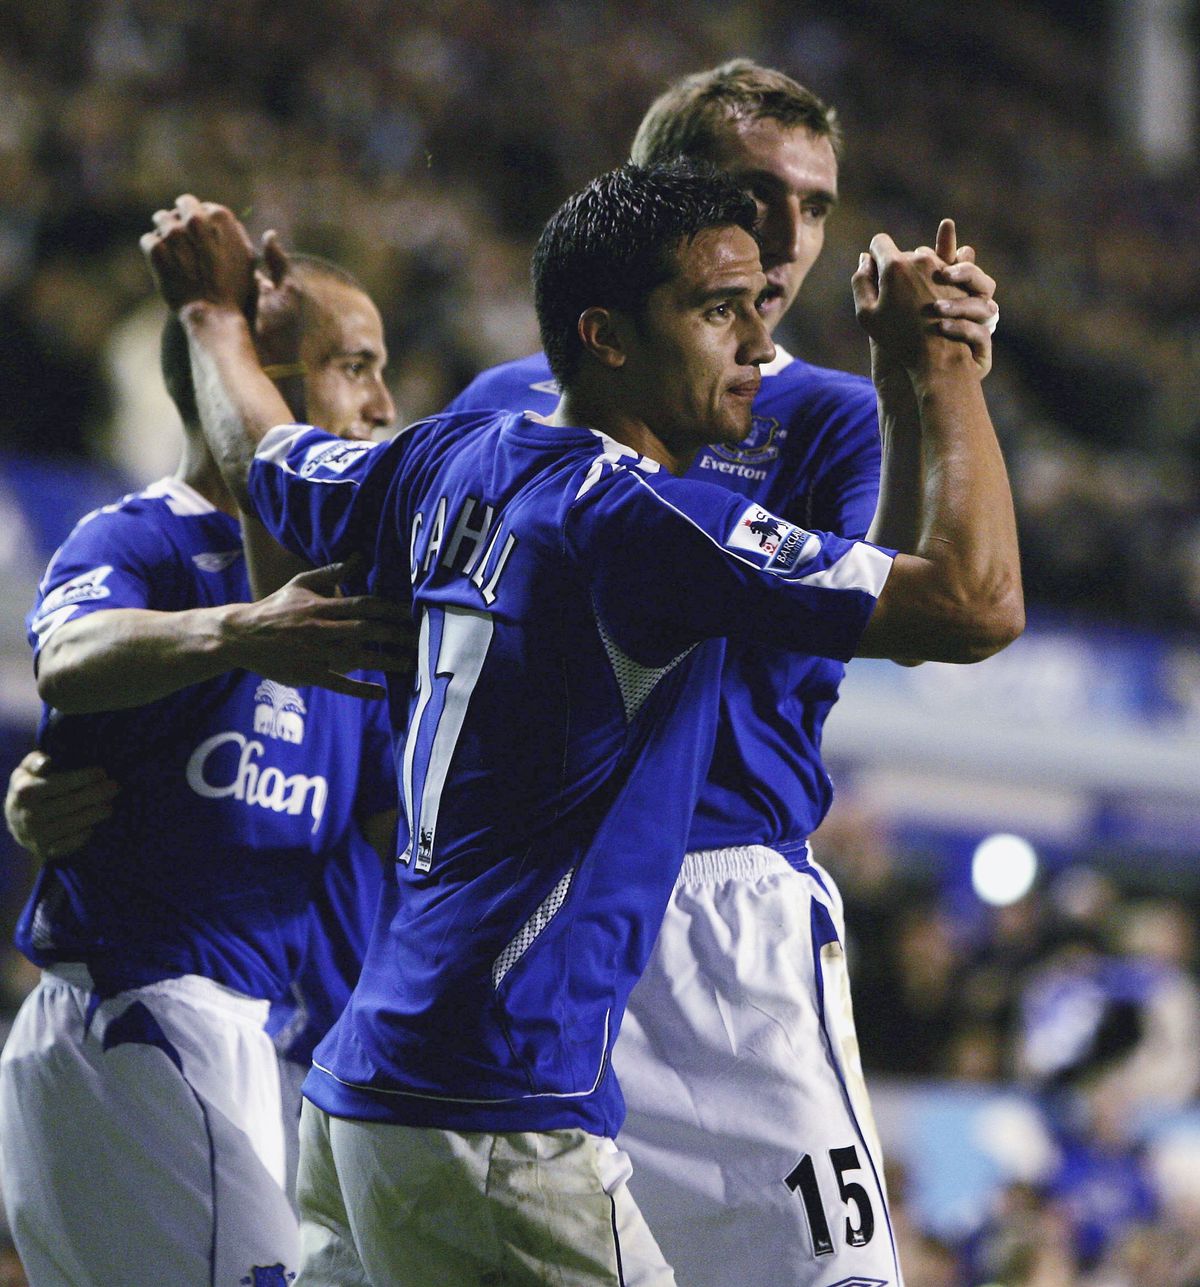 Carling Cup: Everton v Luton Town